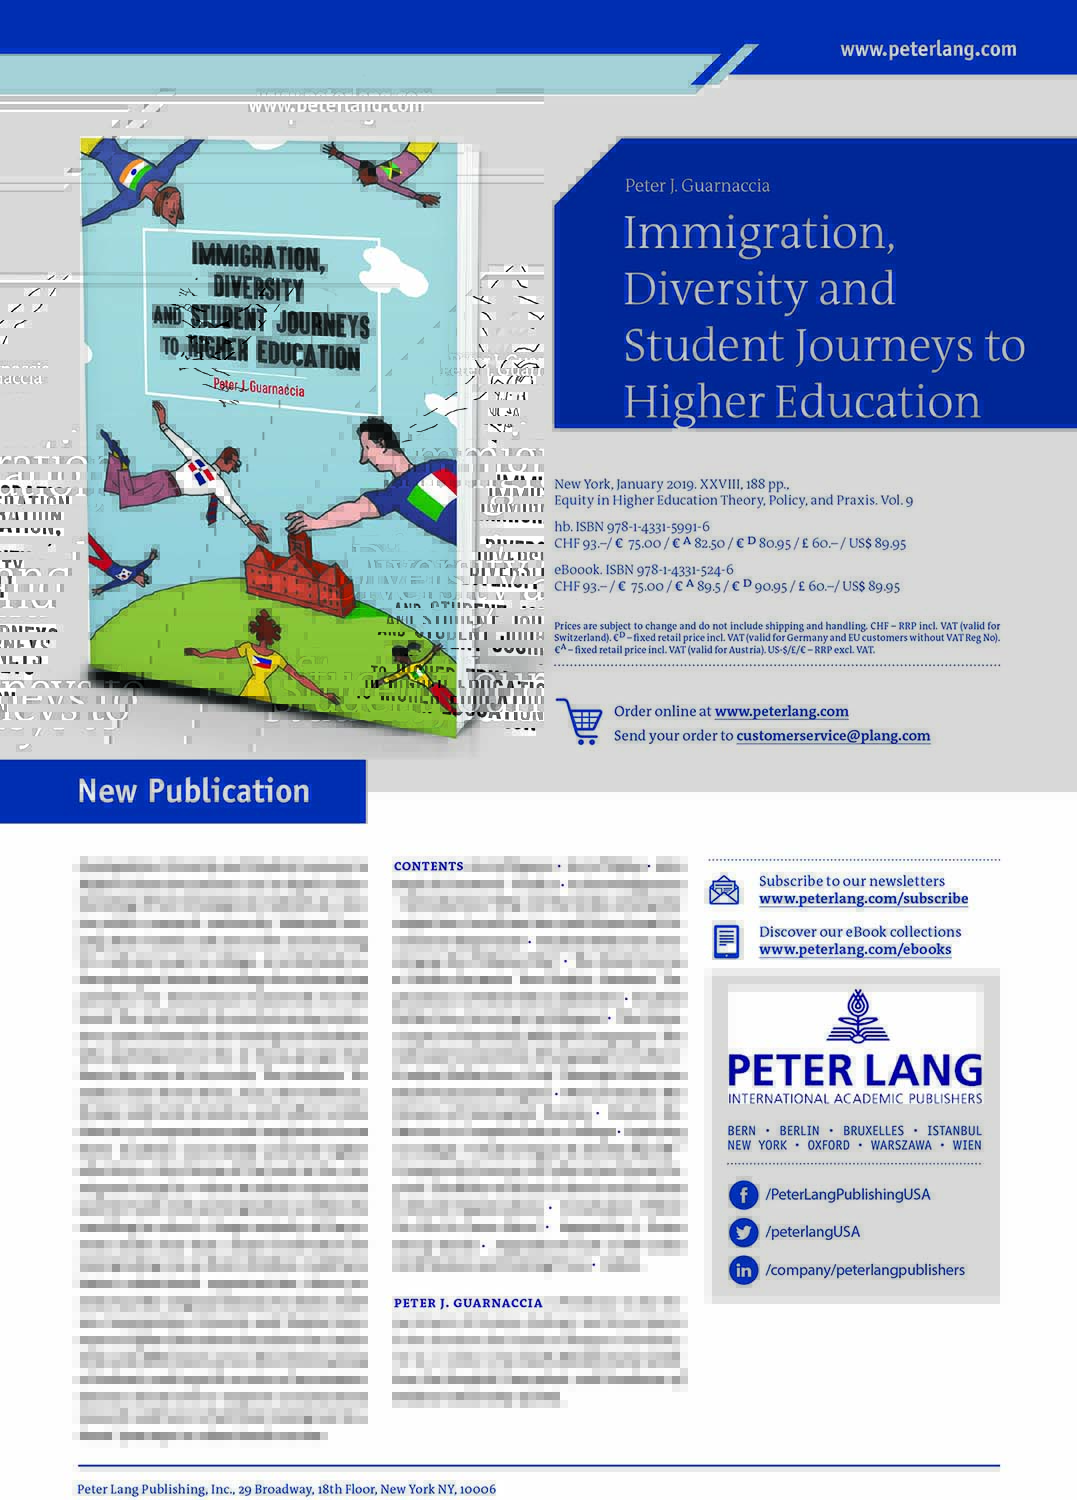 immigration, diversity, and students journeys to higher education cover